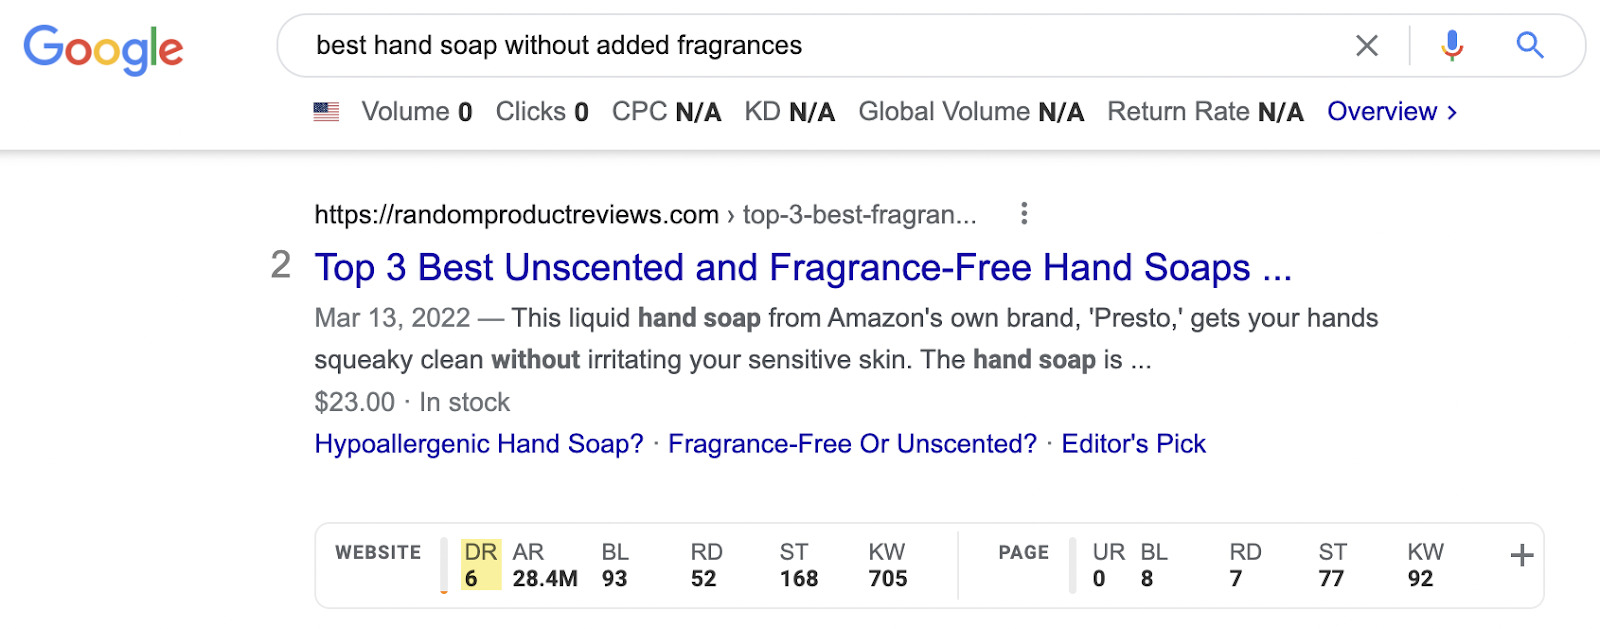 Google SERP for "best fragrance free hand soap";  SEO Toolbar showing a result with DR of 6